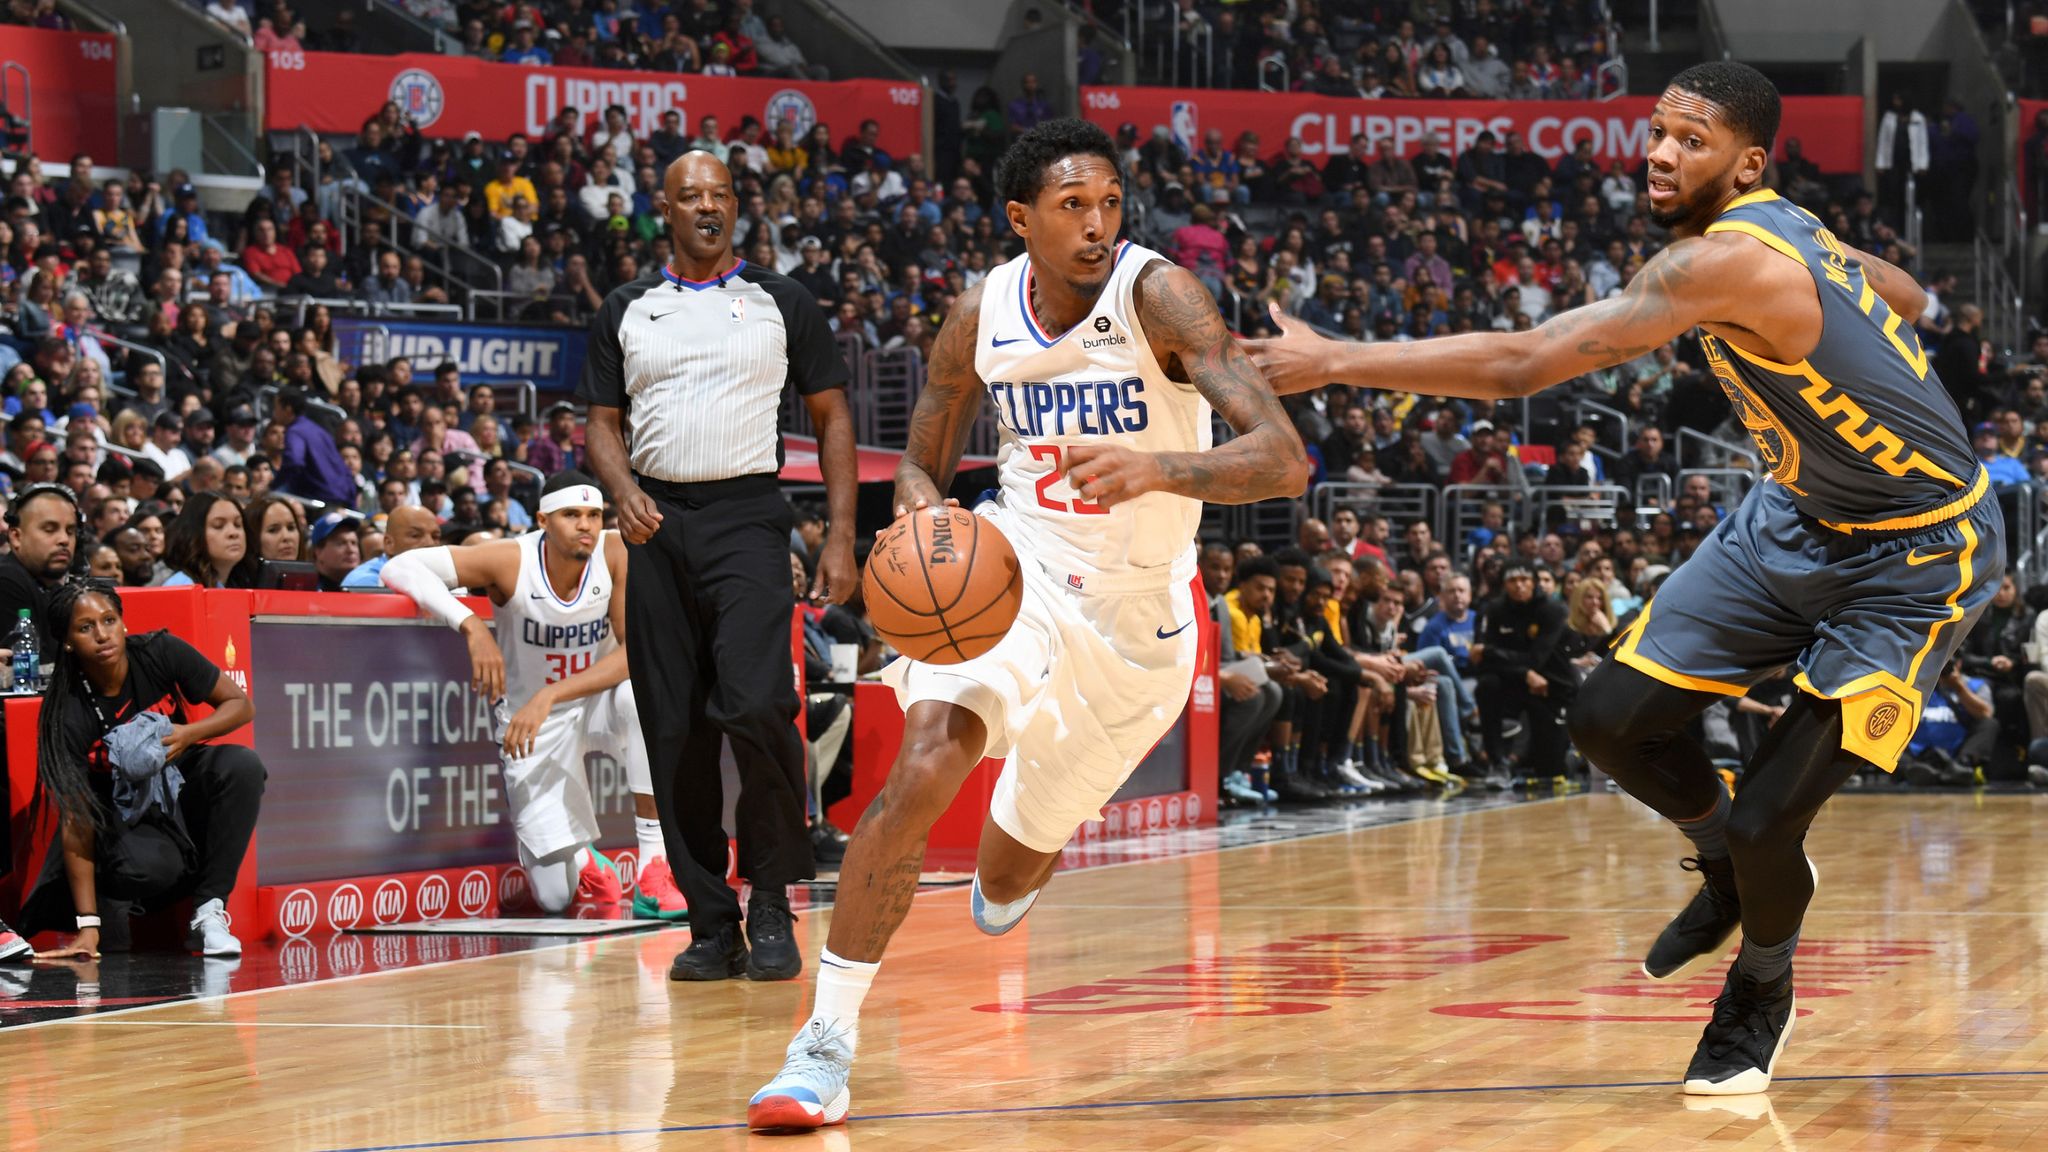 Watch Lou Williams' Highlights Against the Thunder and Sixers